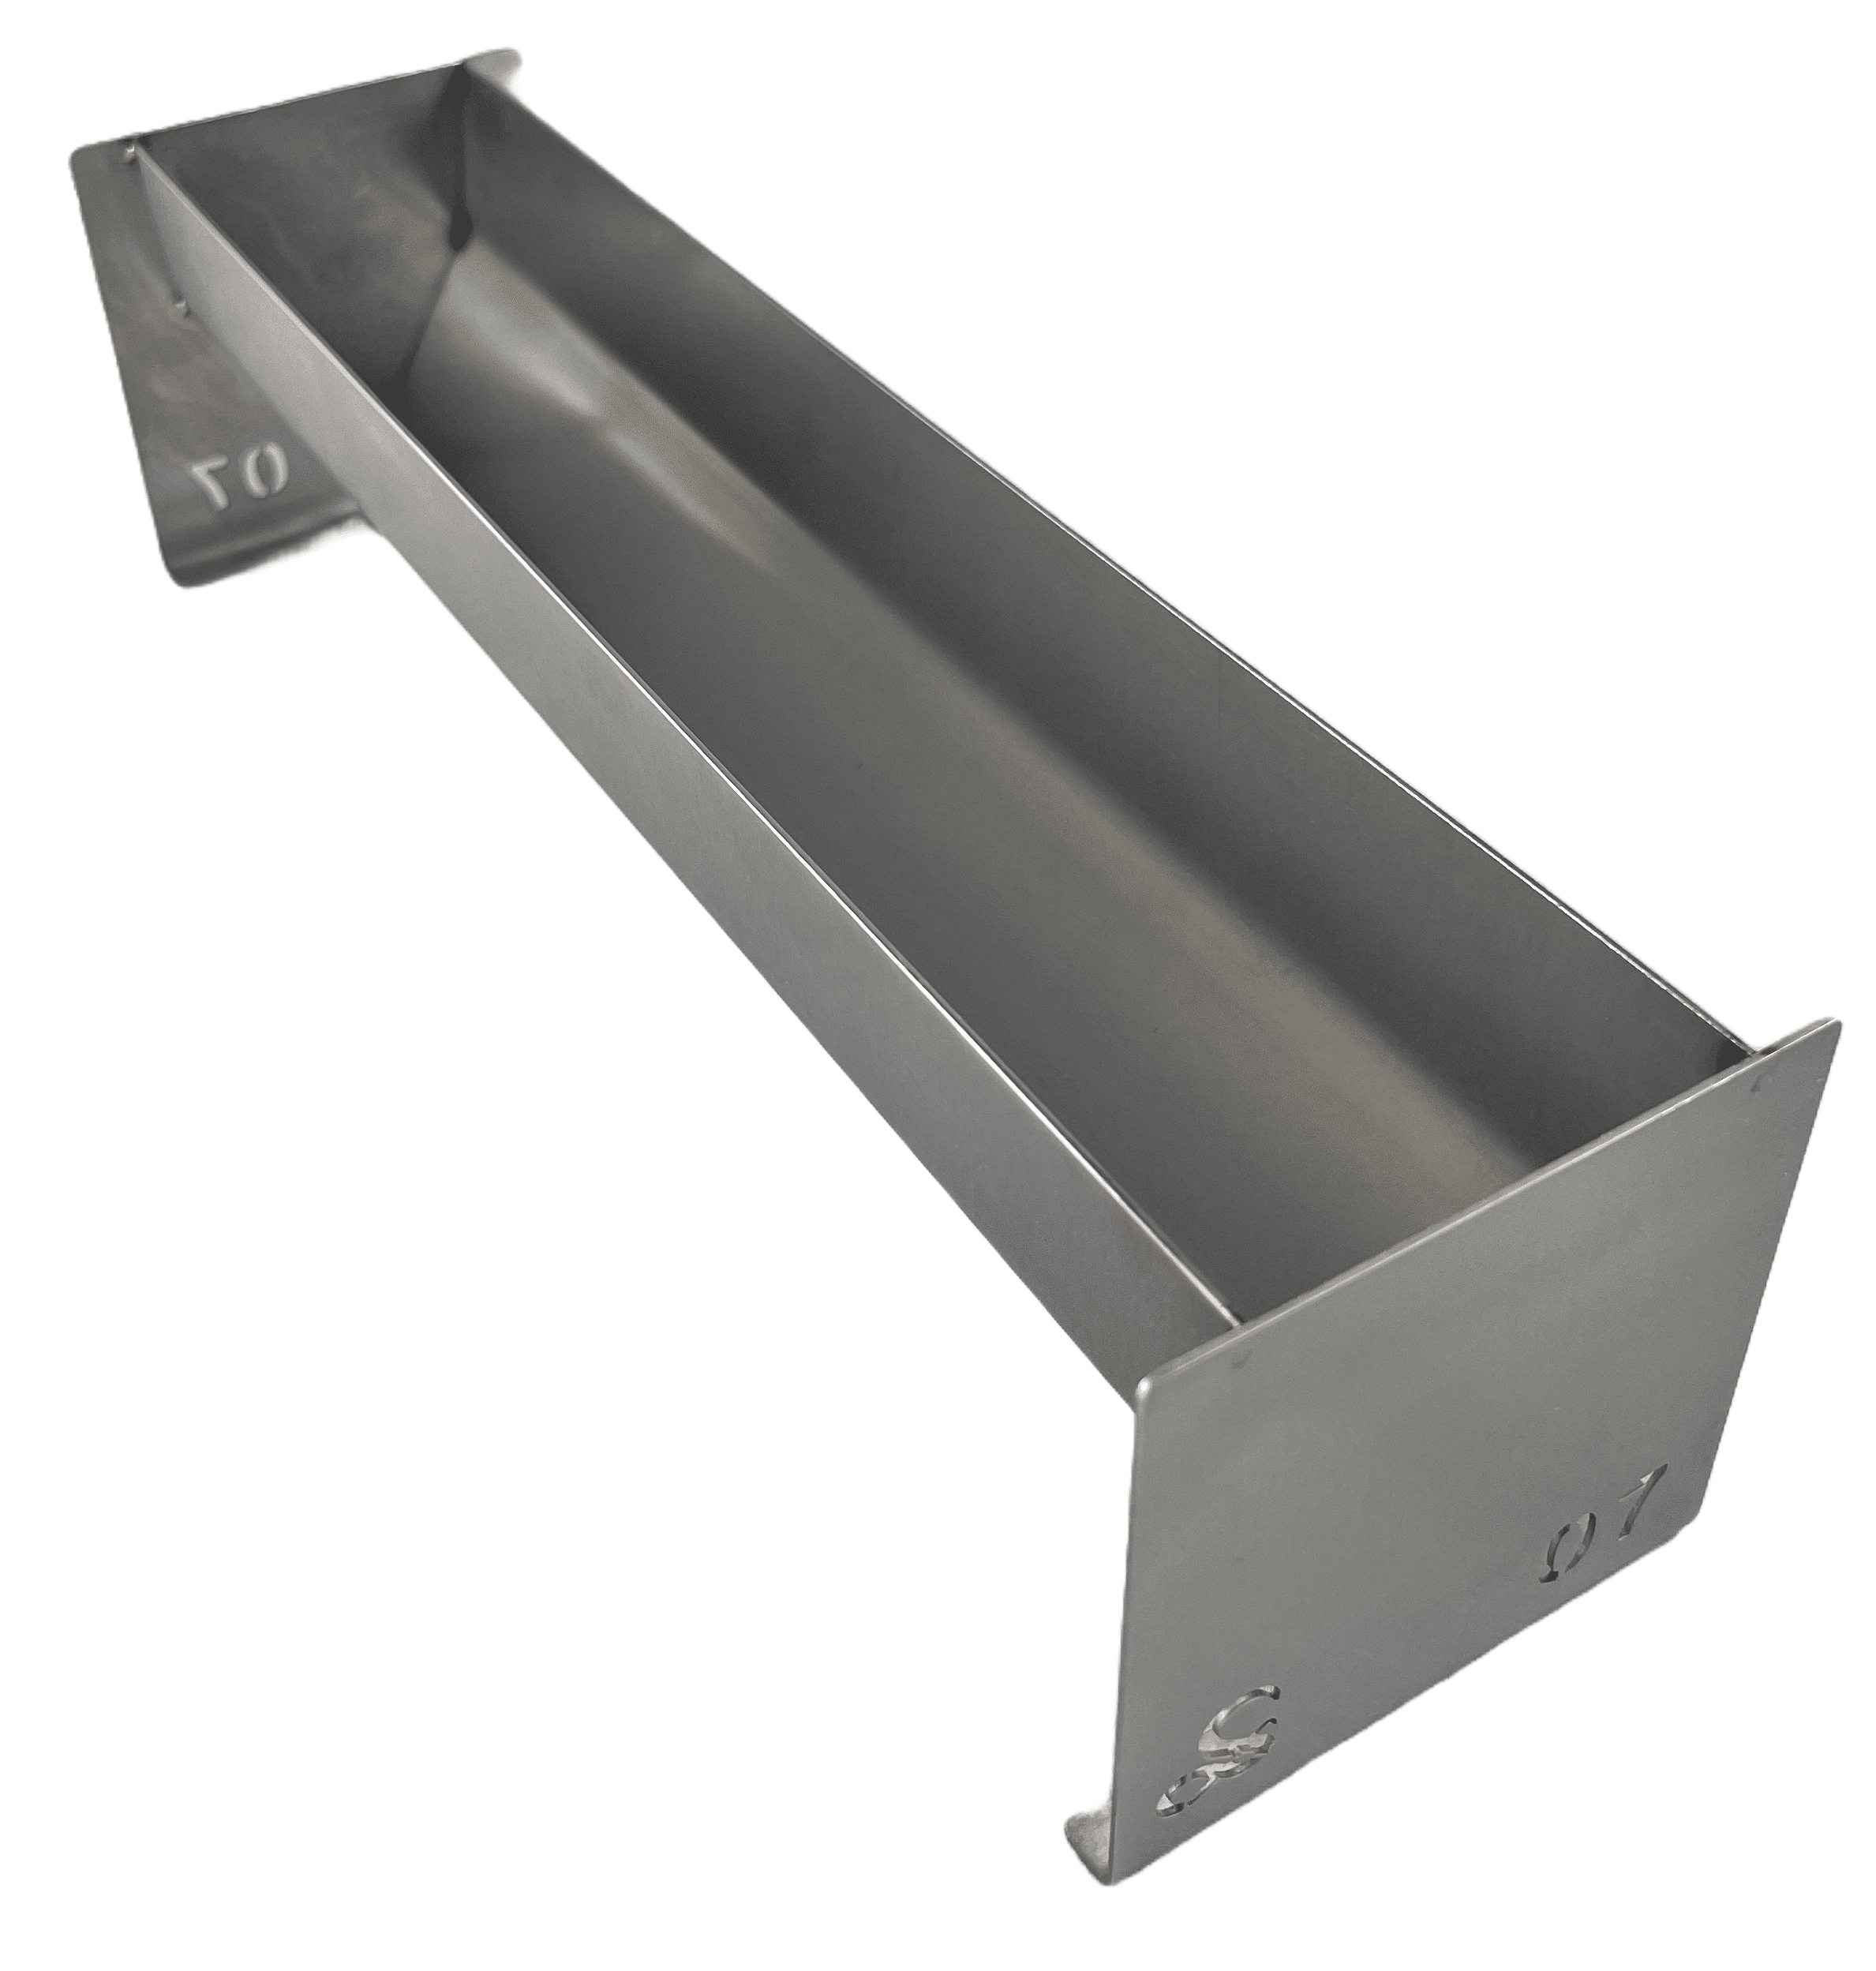 A stainless steel pâté mold, perfect for baking pâtés, pastries and other dishes.